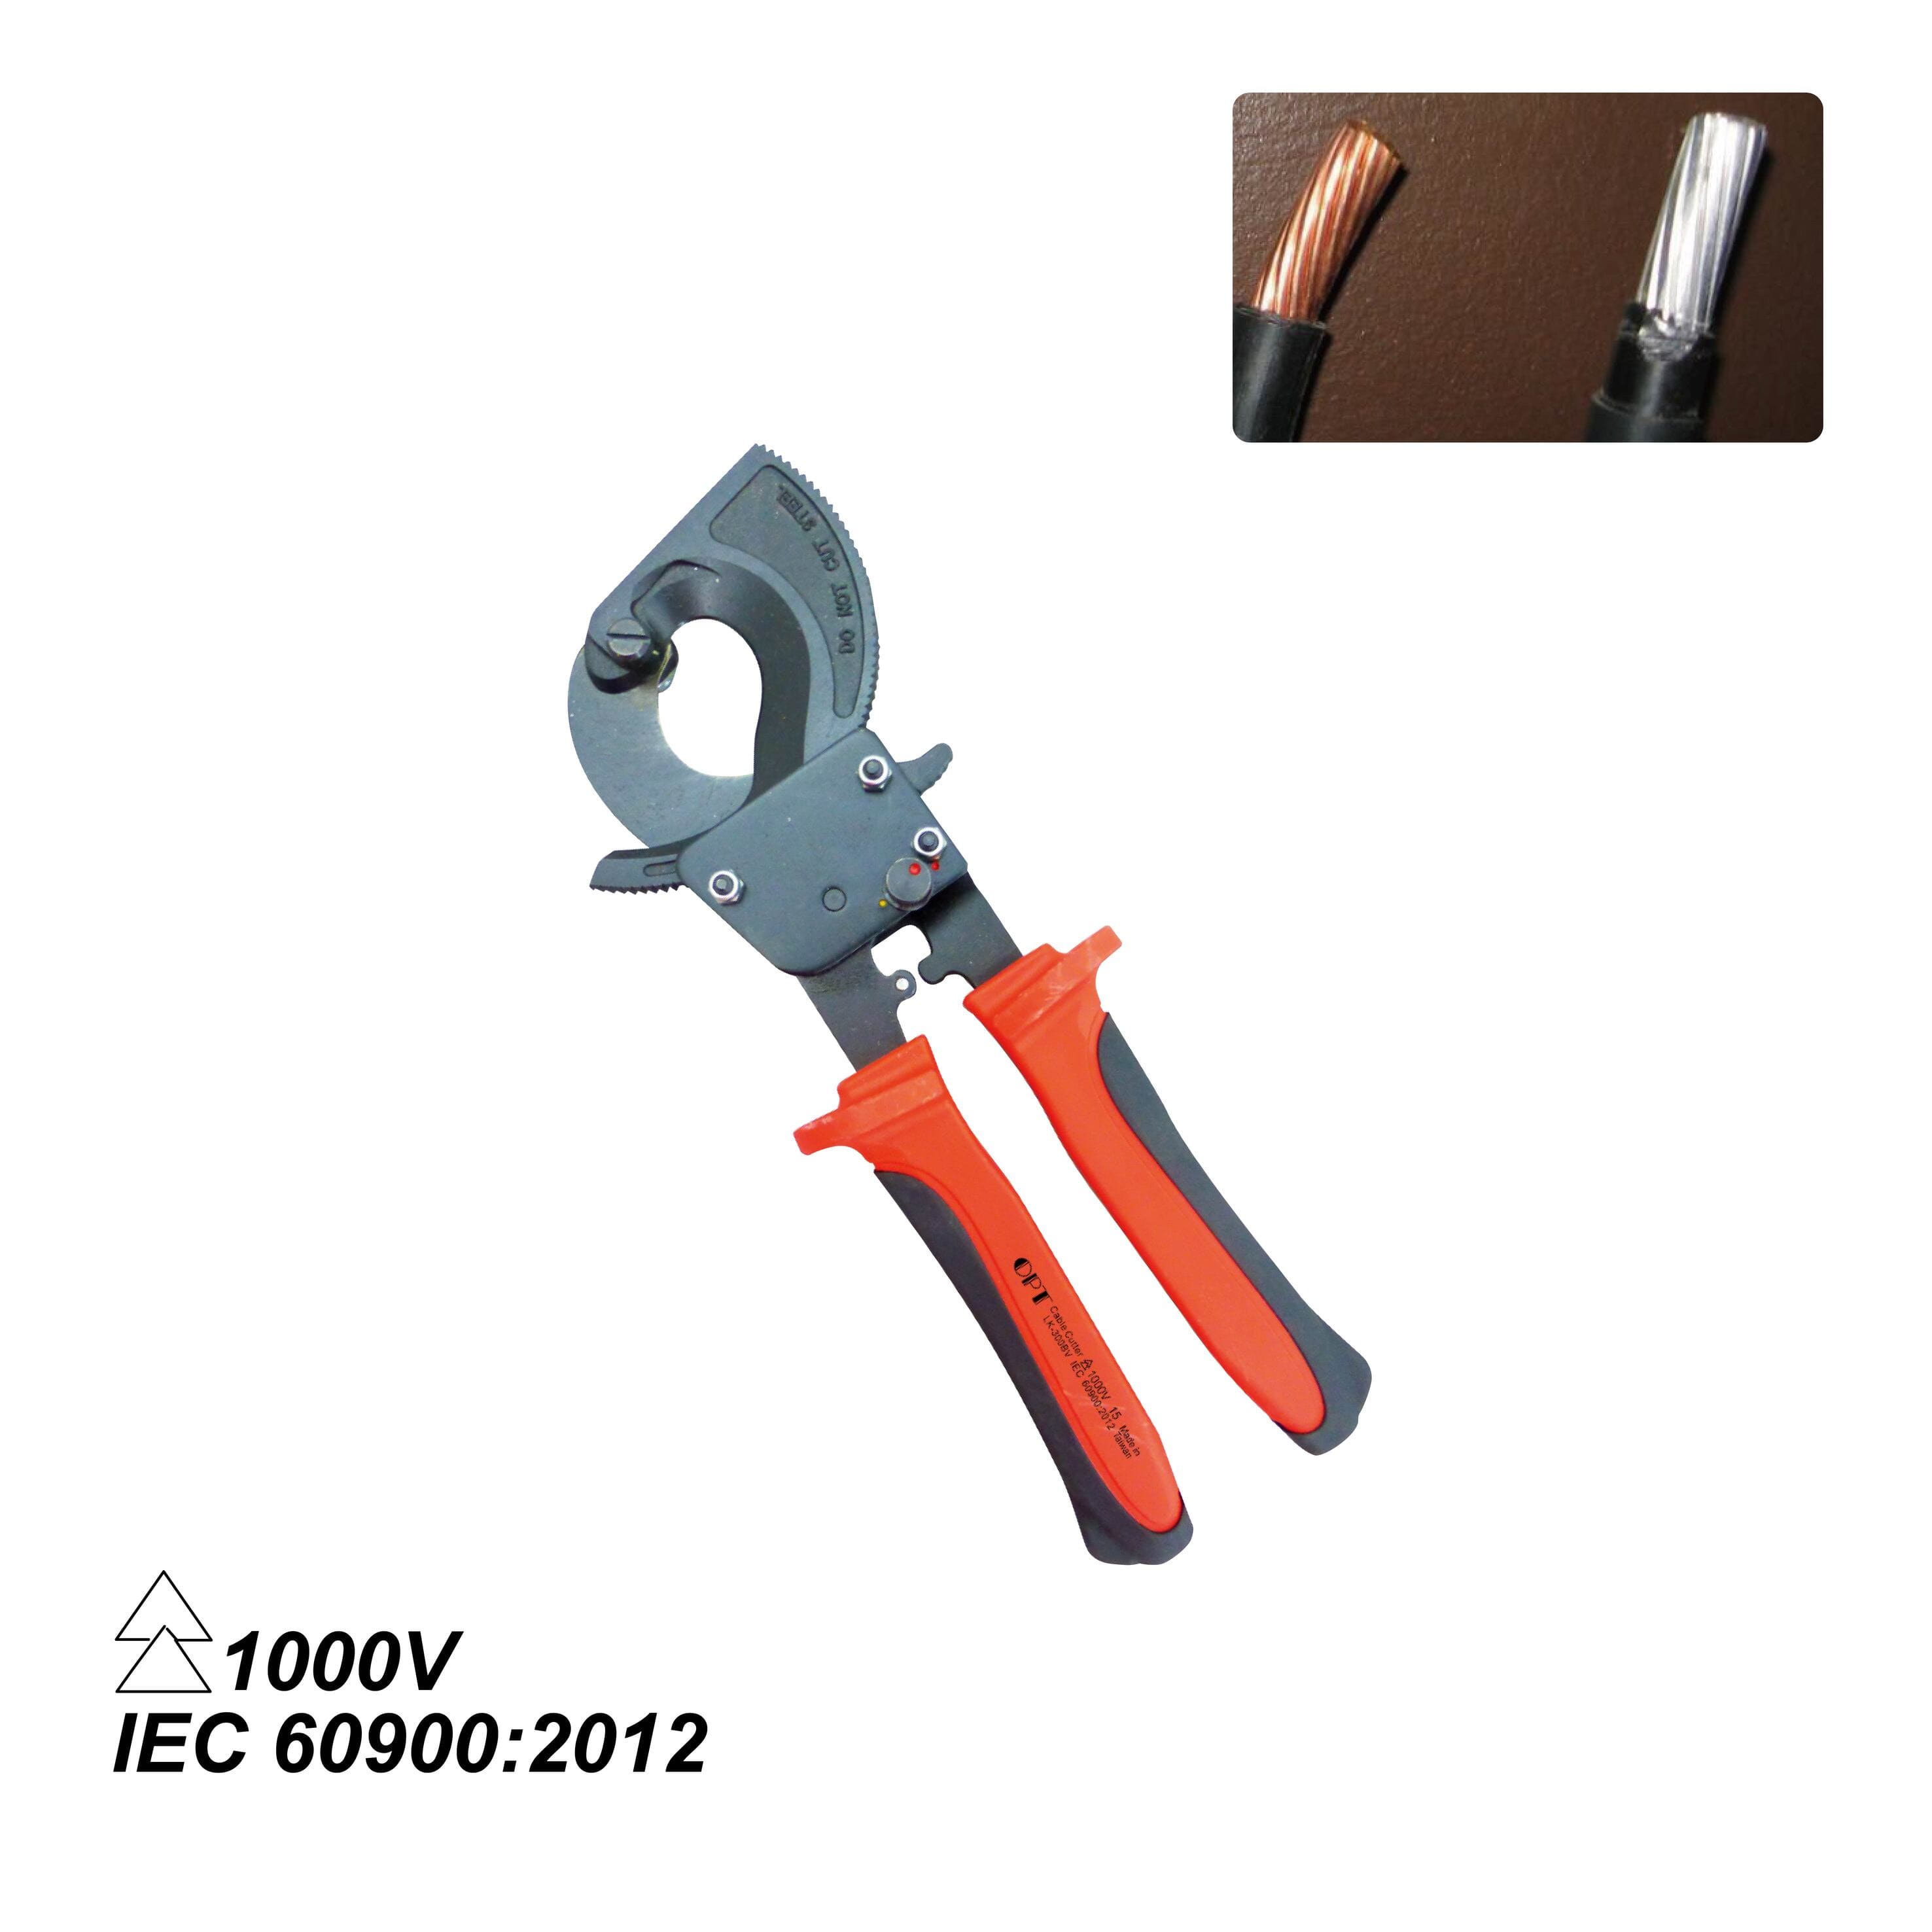 LK-300BV HAND CABLE CUTTERS